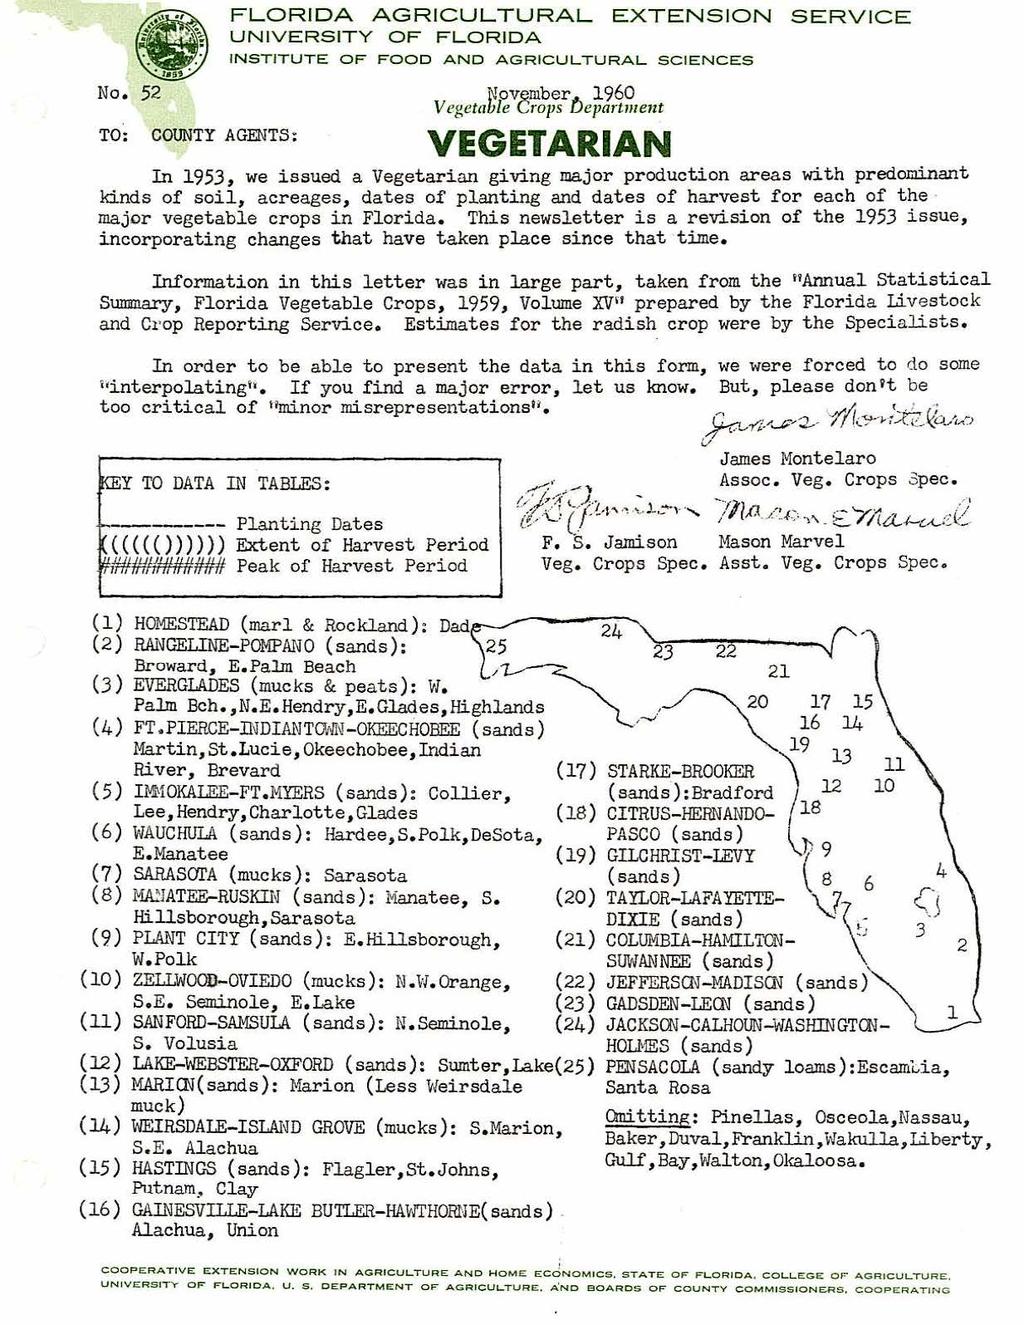 No. 52 TO: COUNTY AGENTS: FLORIDA AGRICULTURAL E X TEN SION SERVICE UNIVERSITY OF FLORIDA INST ITUTE OF FOOD AND AGRICULTURAL SCIENCES Nov~mber 1960 Vegetable Crops b epartment VEGETARIAN In 1953, we